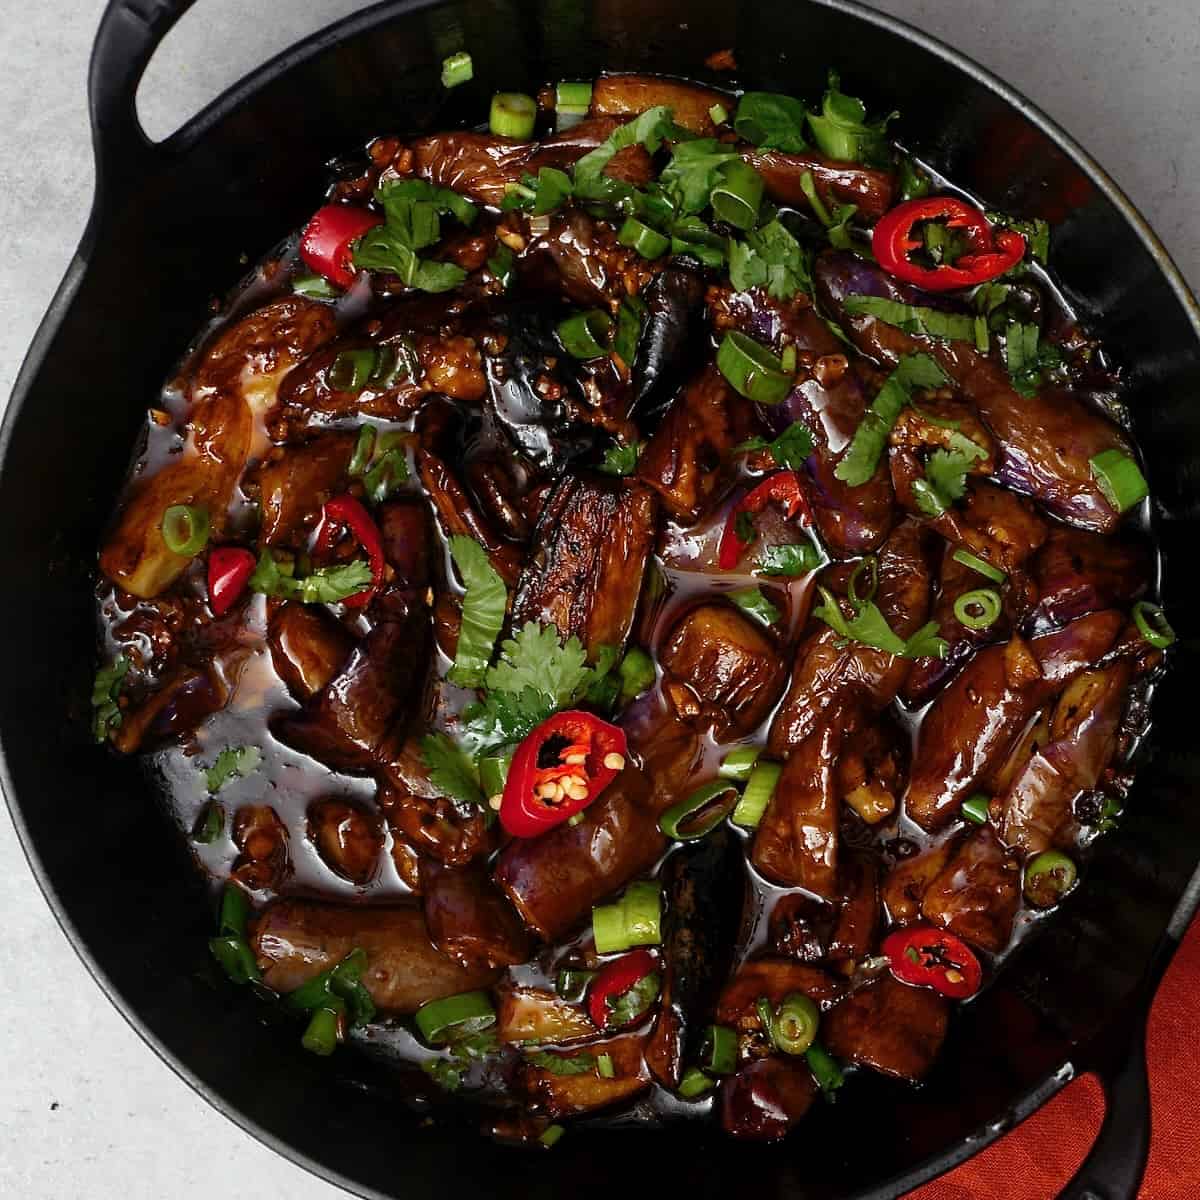 https://www.alphafoodie.com/wp-content/uploads/2022/11/Chinese-Eggplant-square.jpeg